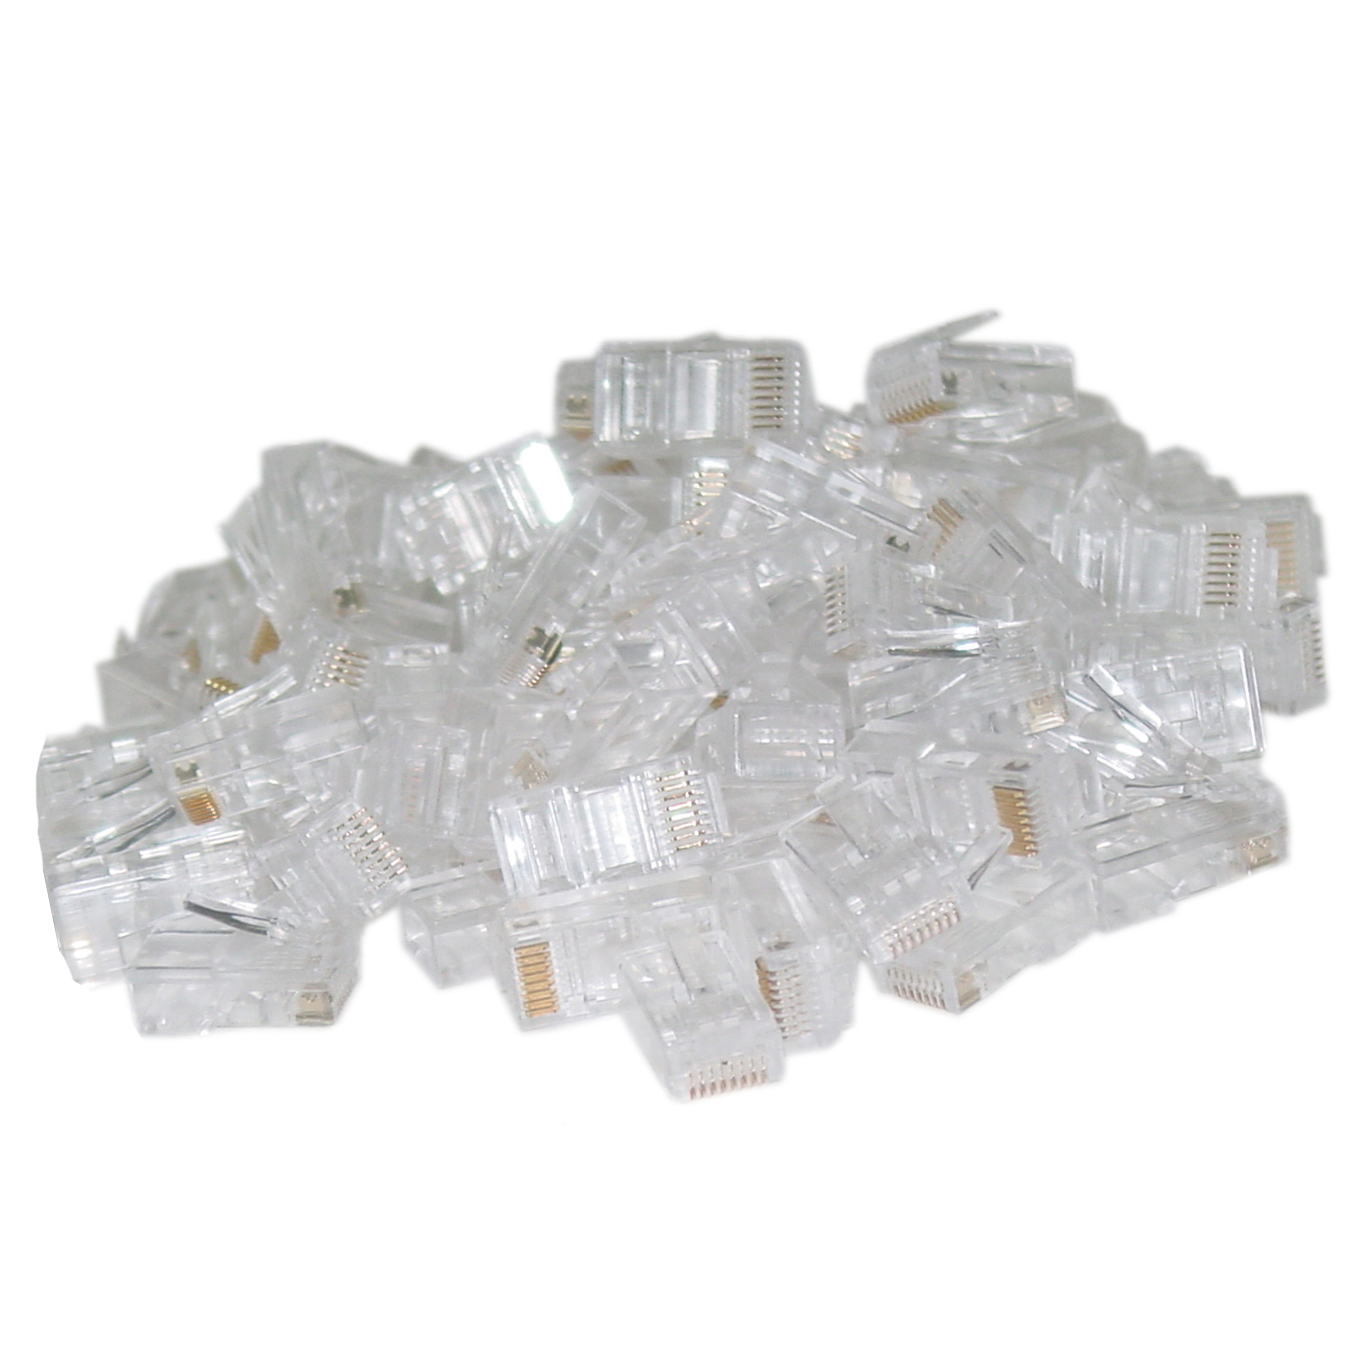 108710 - CAT5e RJ45 Crimp-On Connector Plugs for Solid Cable - Bag of 100